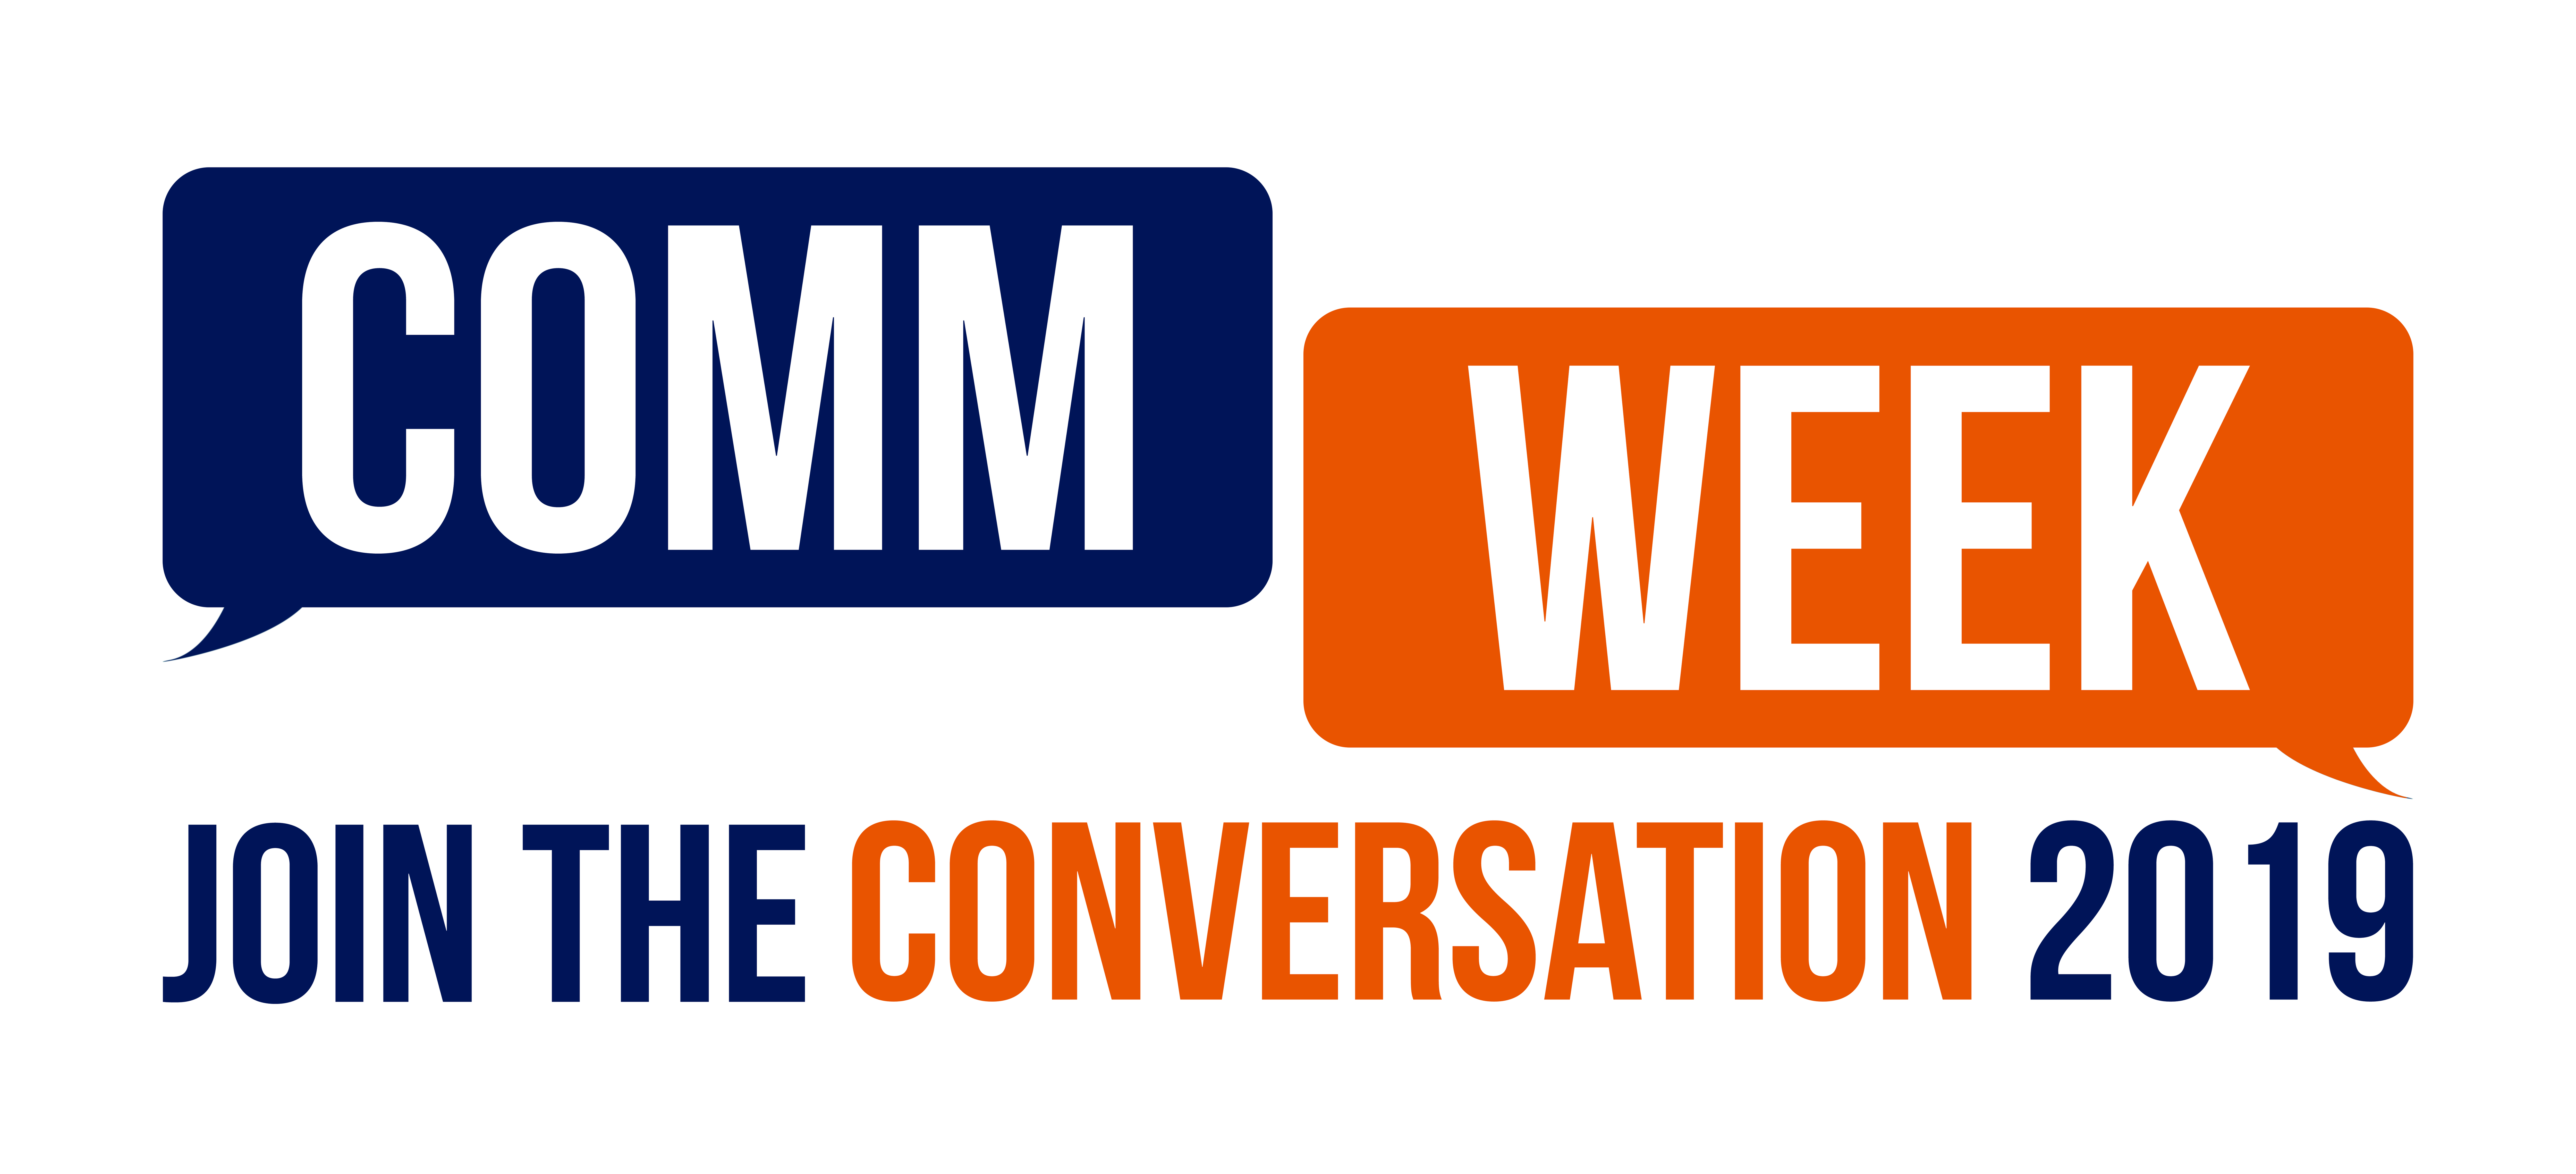 commweek join the conversation